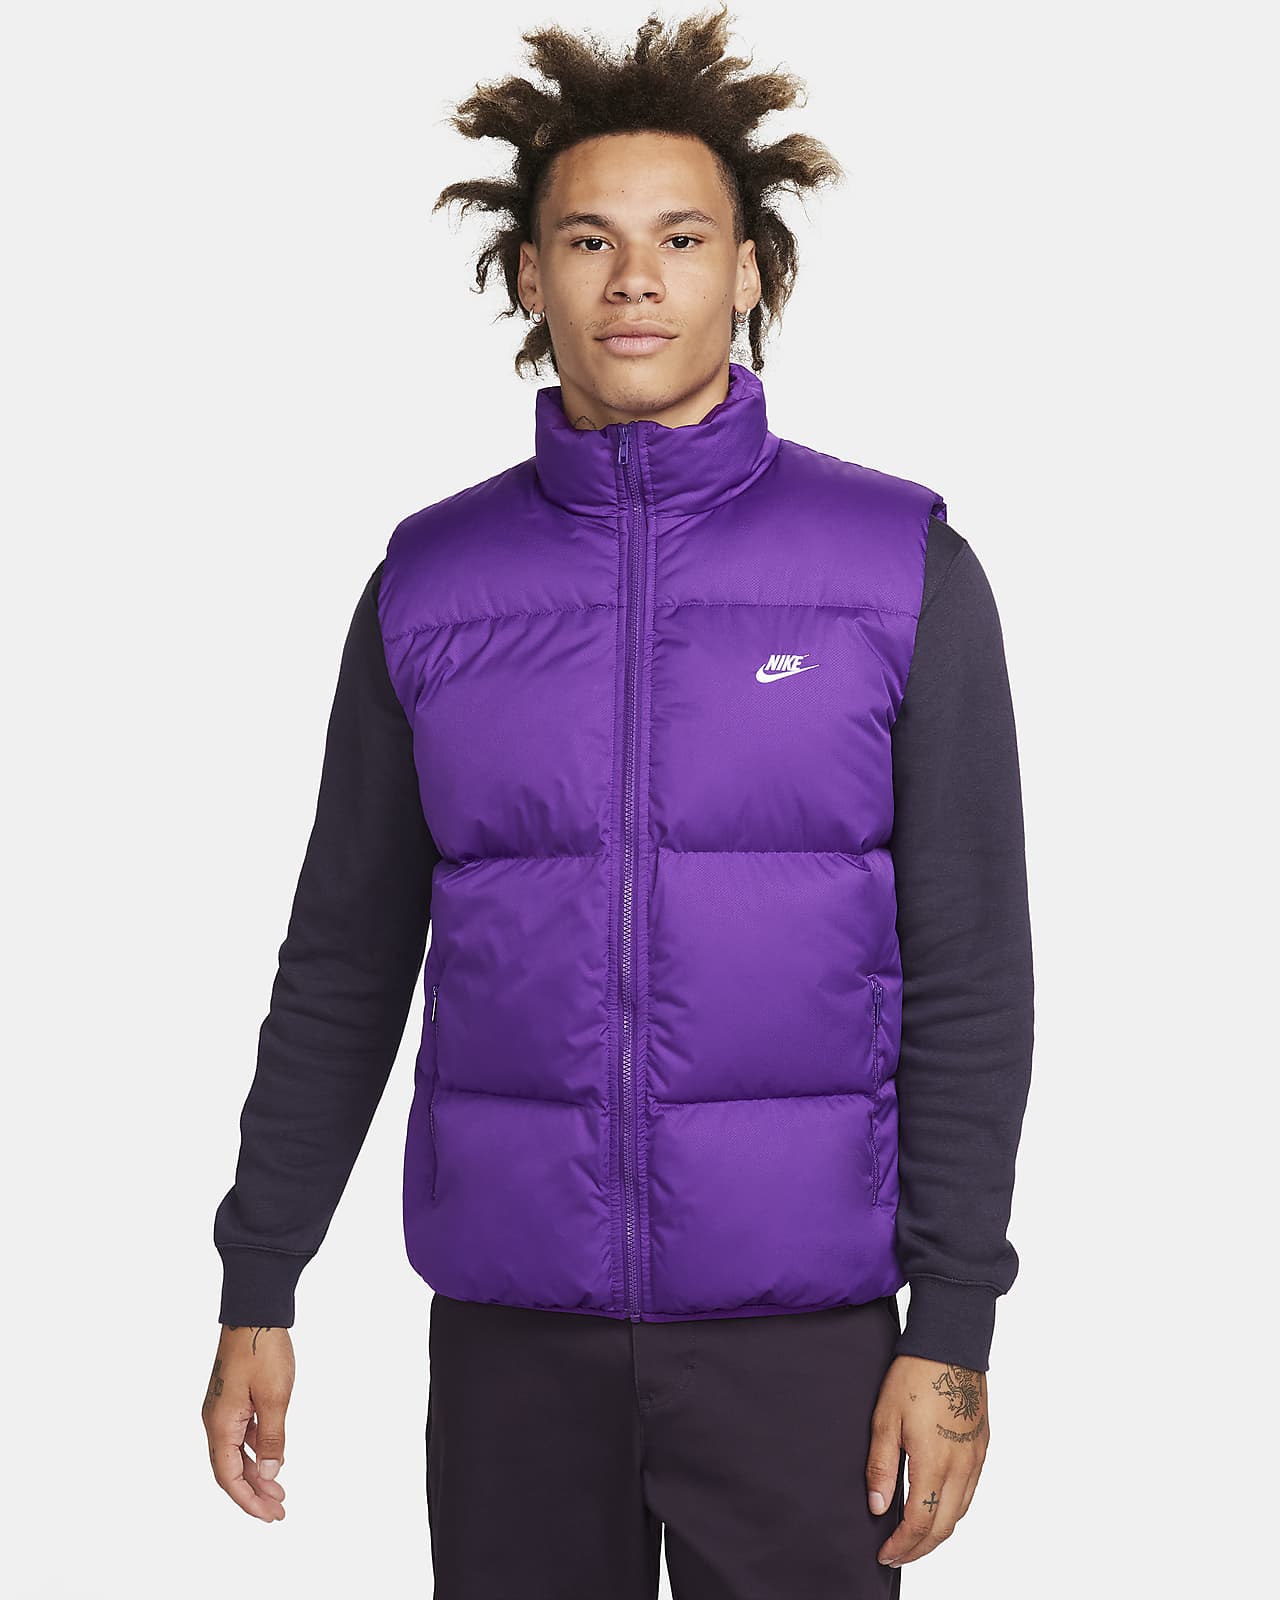 The North Face - Jackets, Puffers, Vests & Bags - JD Sports NZ